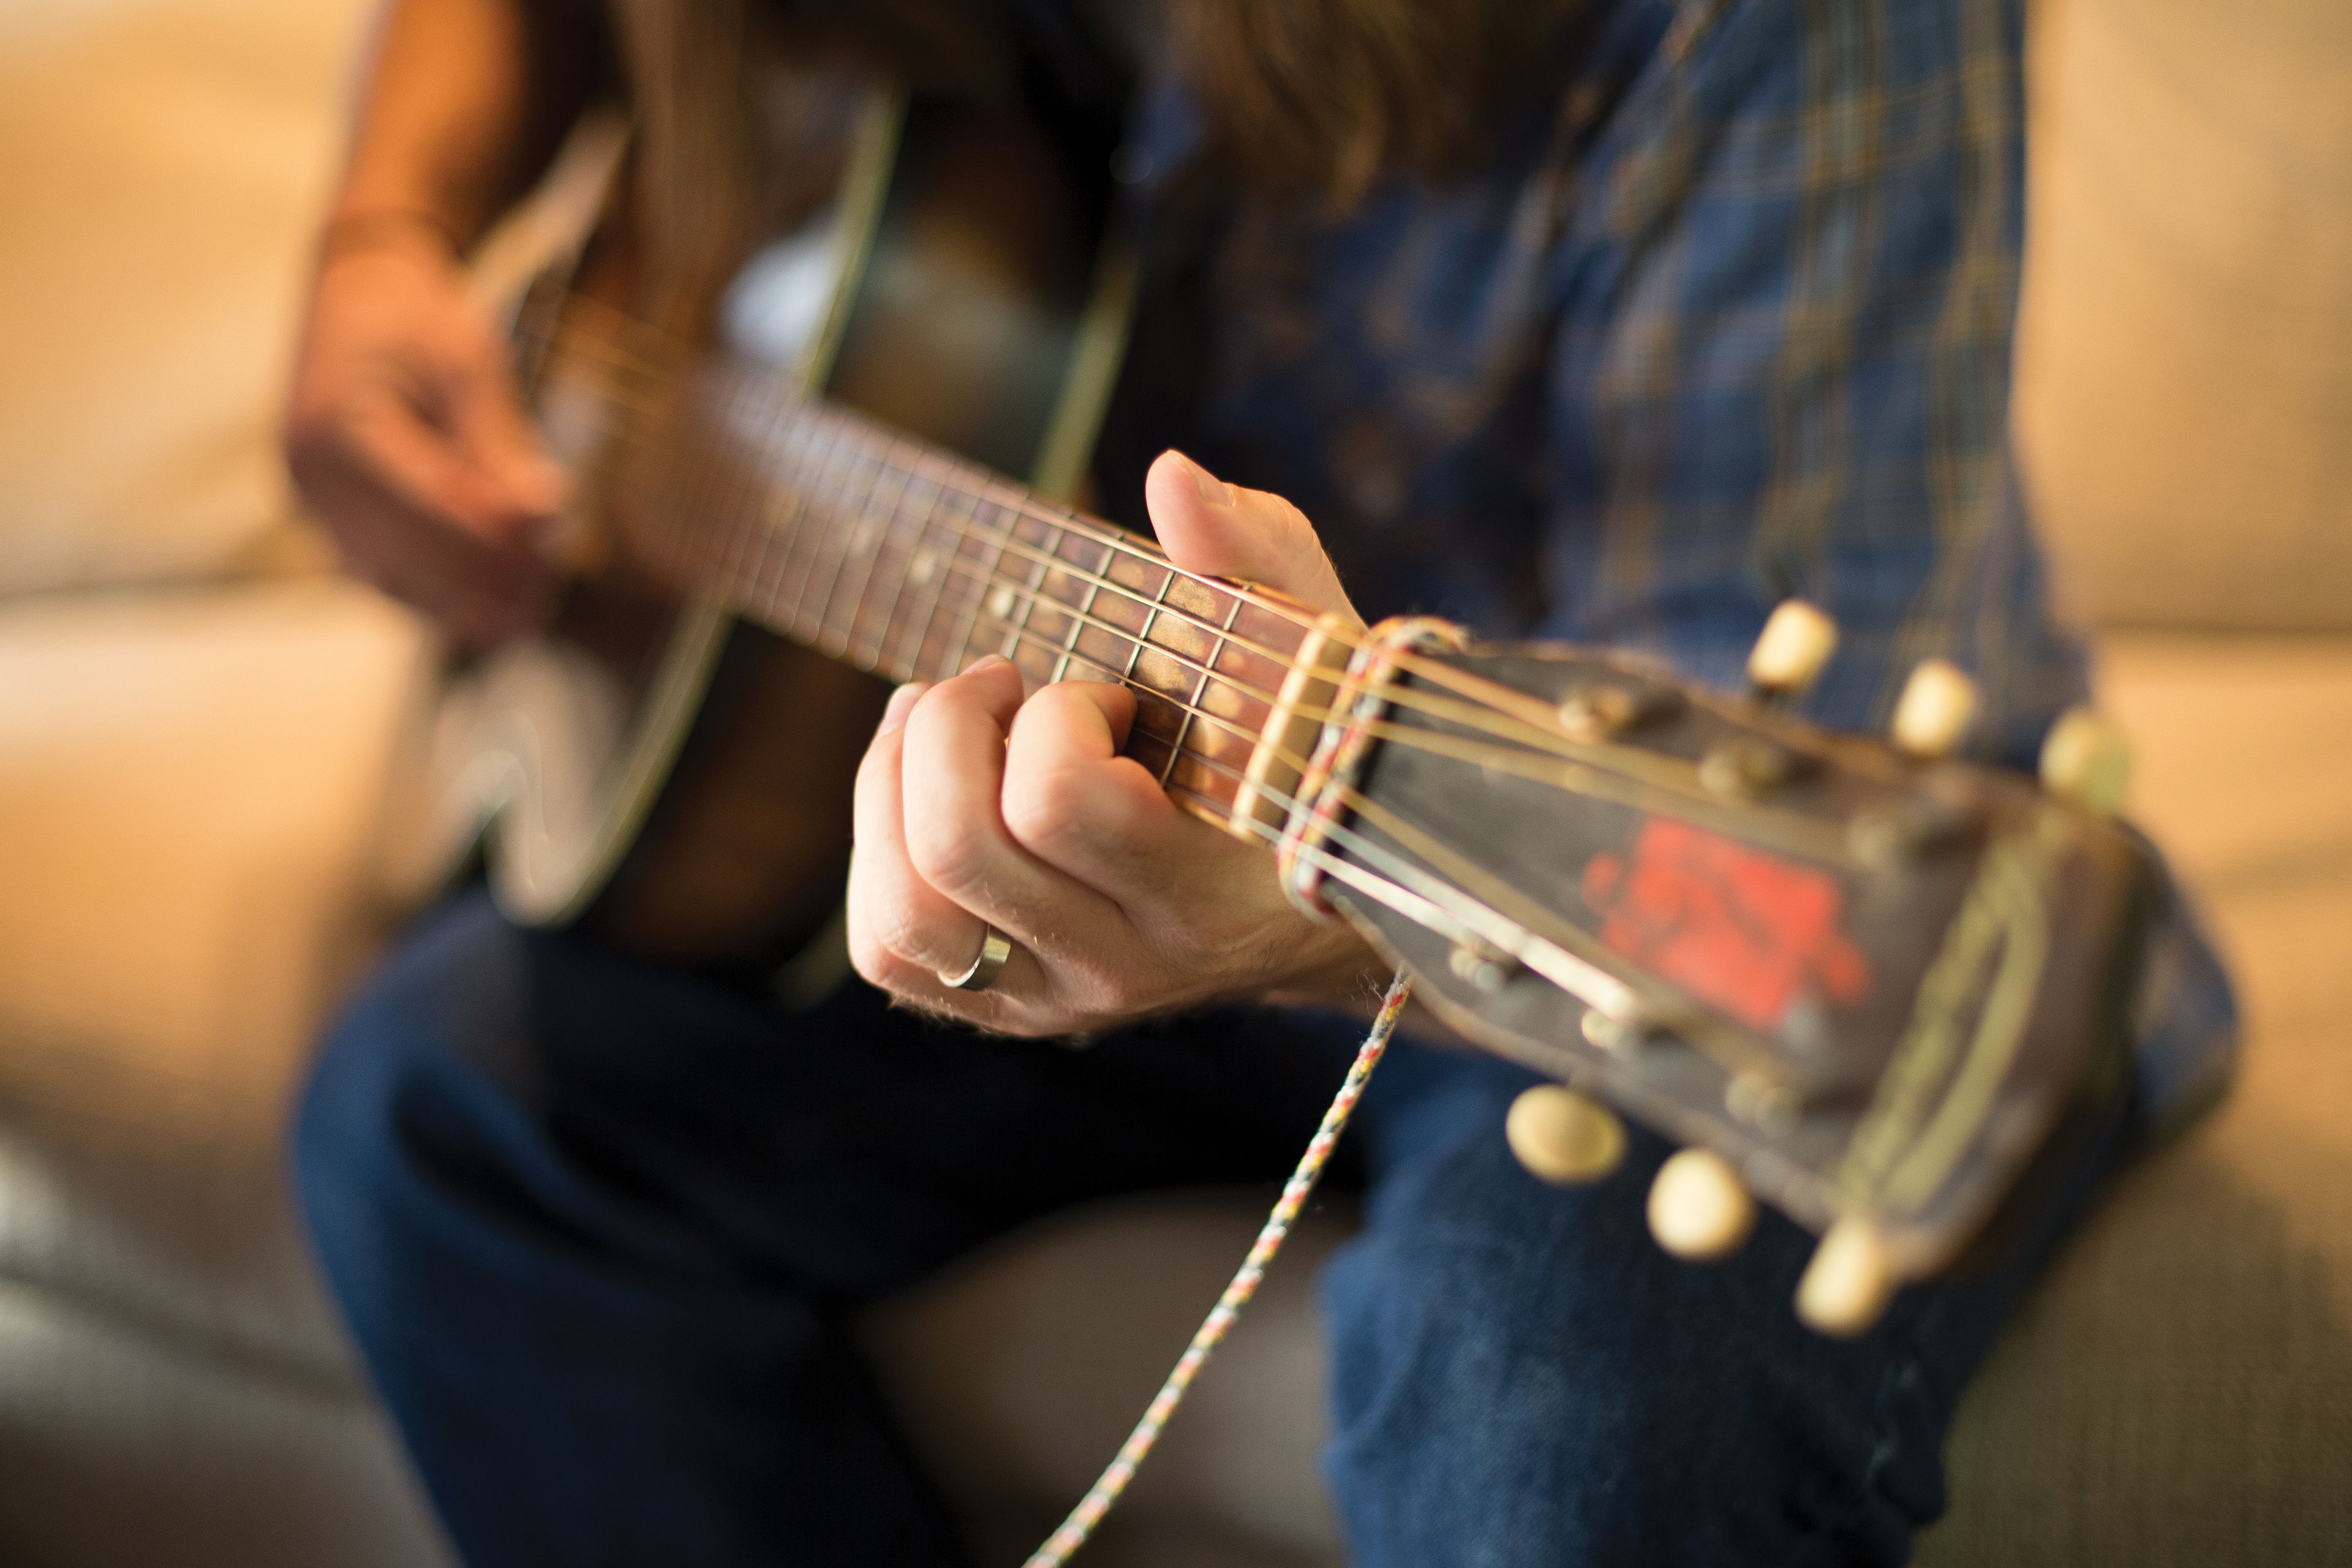 The hands of a young man are seen strumming a guitar.